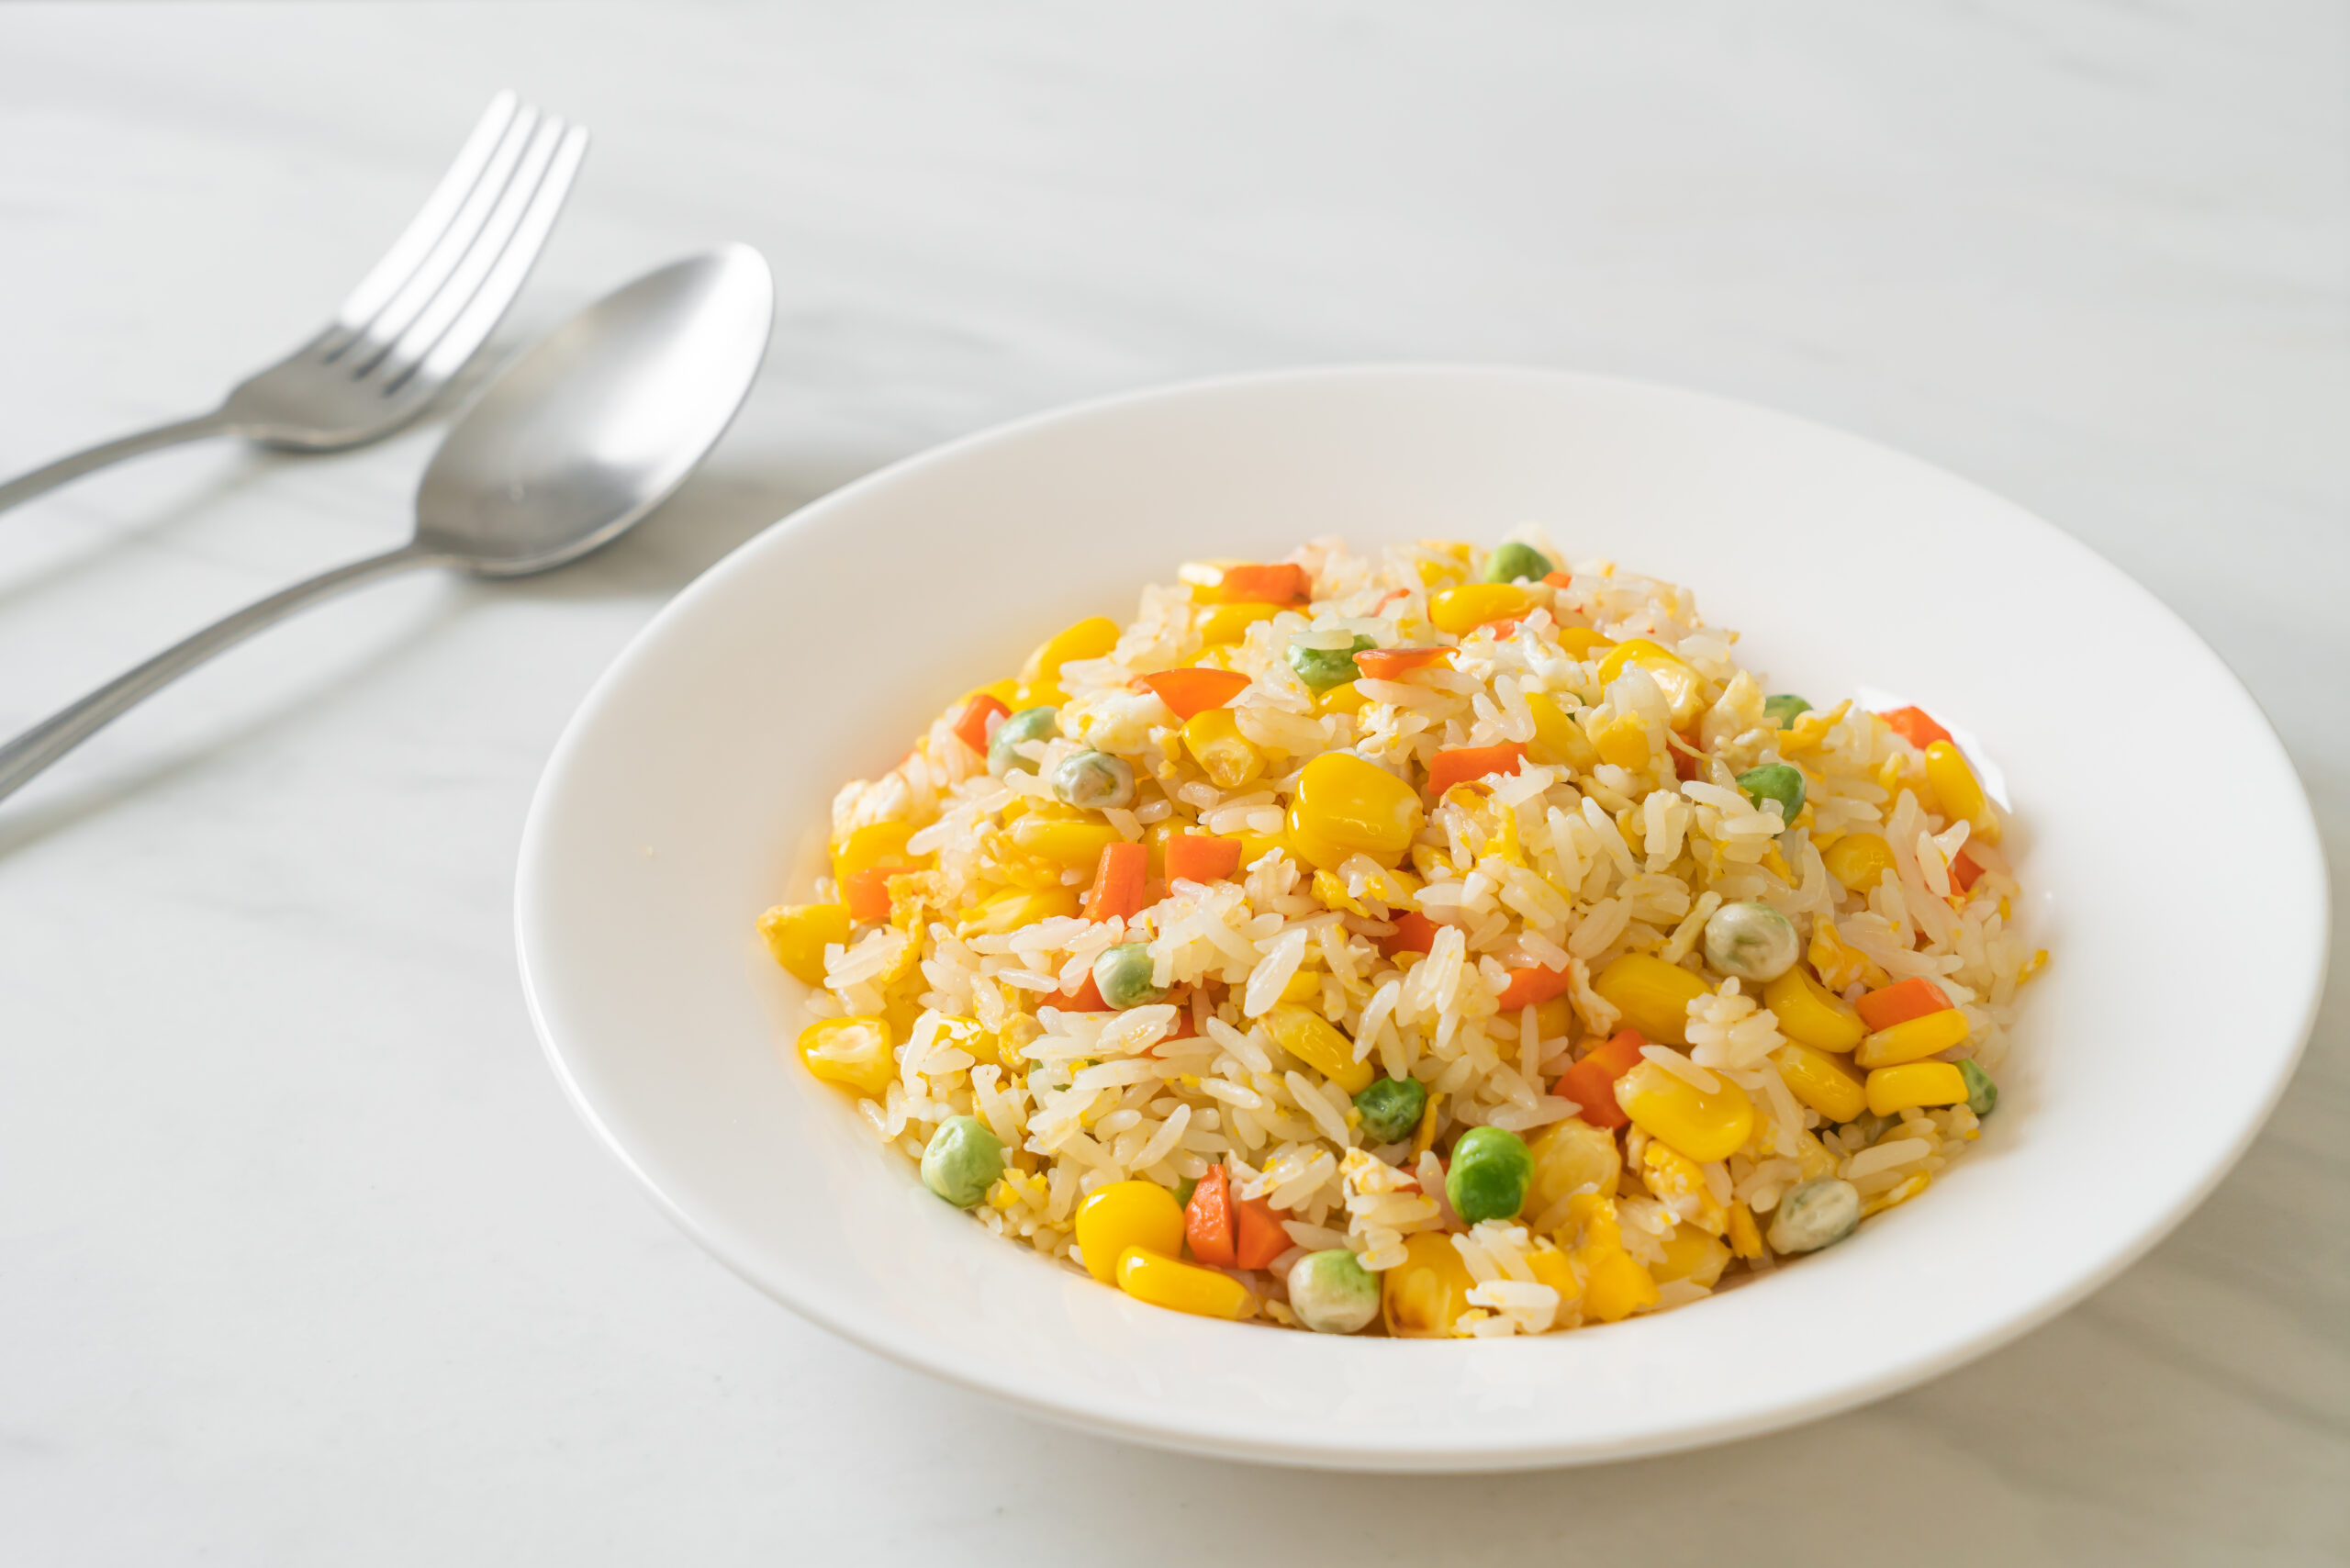 Homemade,Fried,Rice,With,Mixed,Vegetable,(carrot,,Green,Bean,Peas,